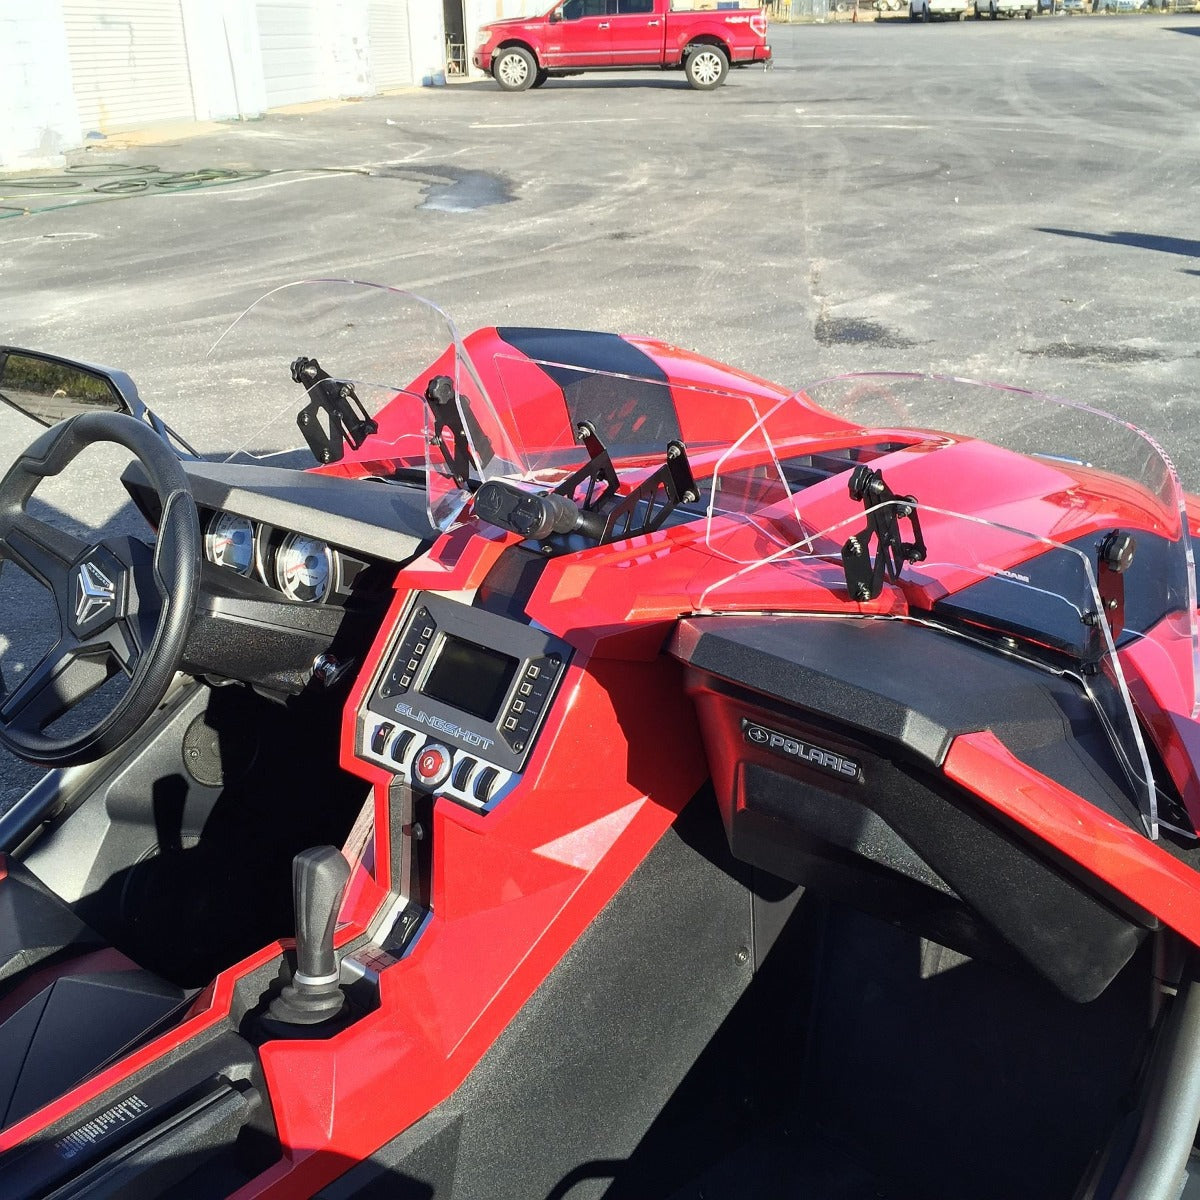 MADSTAD DUAL 10" DOUBLE BUBBLE WINDSHIELD SYSTEM FOR THE POLARIS SLINGSHOT (2015-2019)